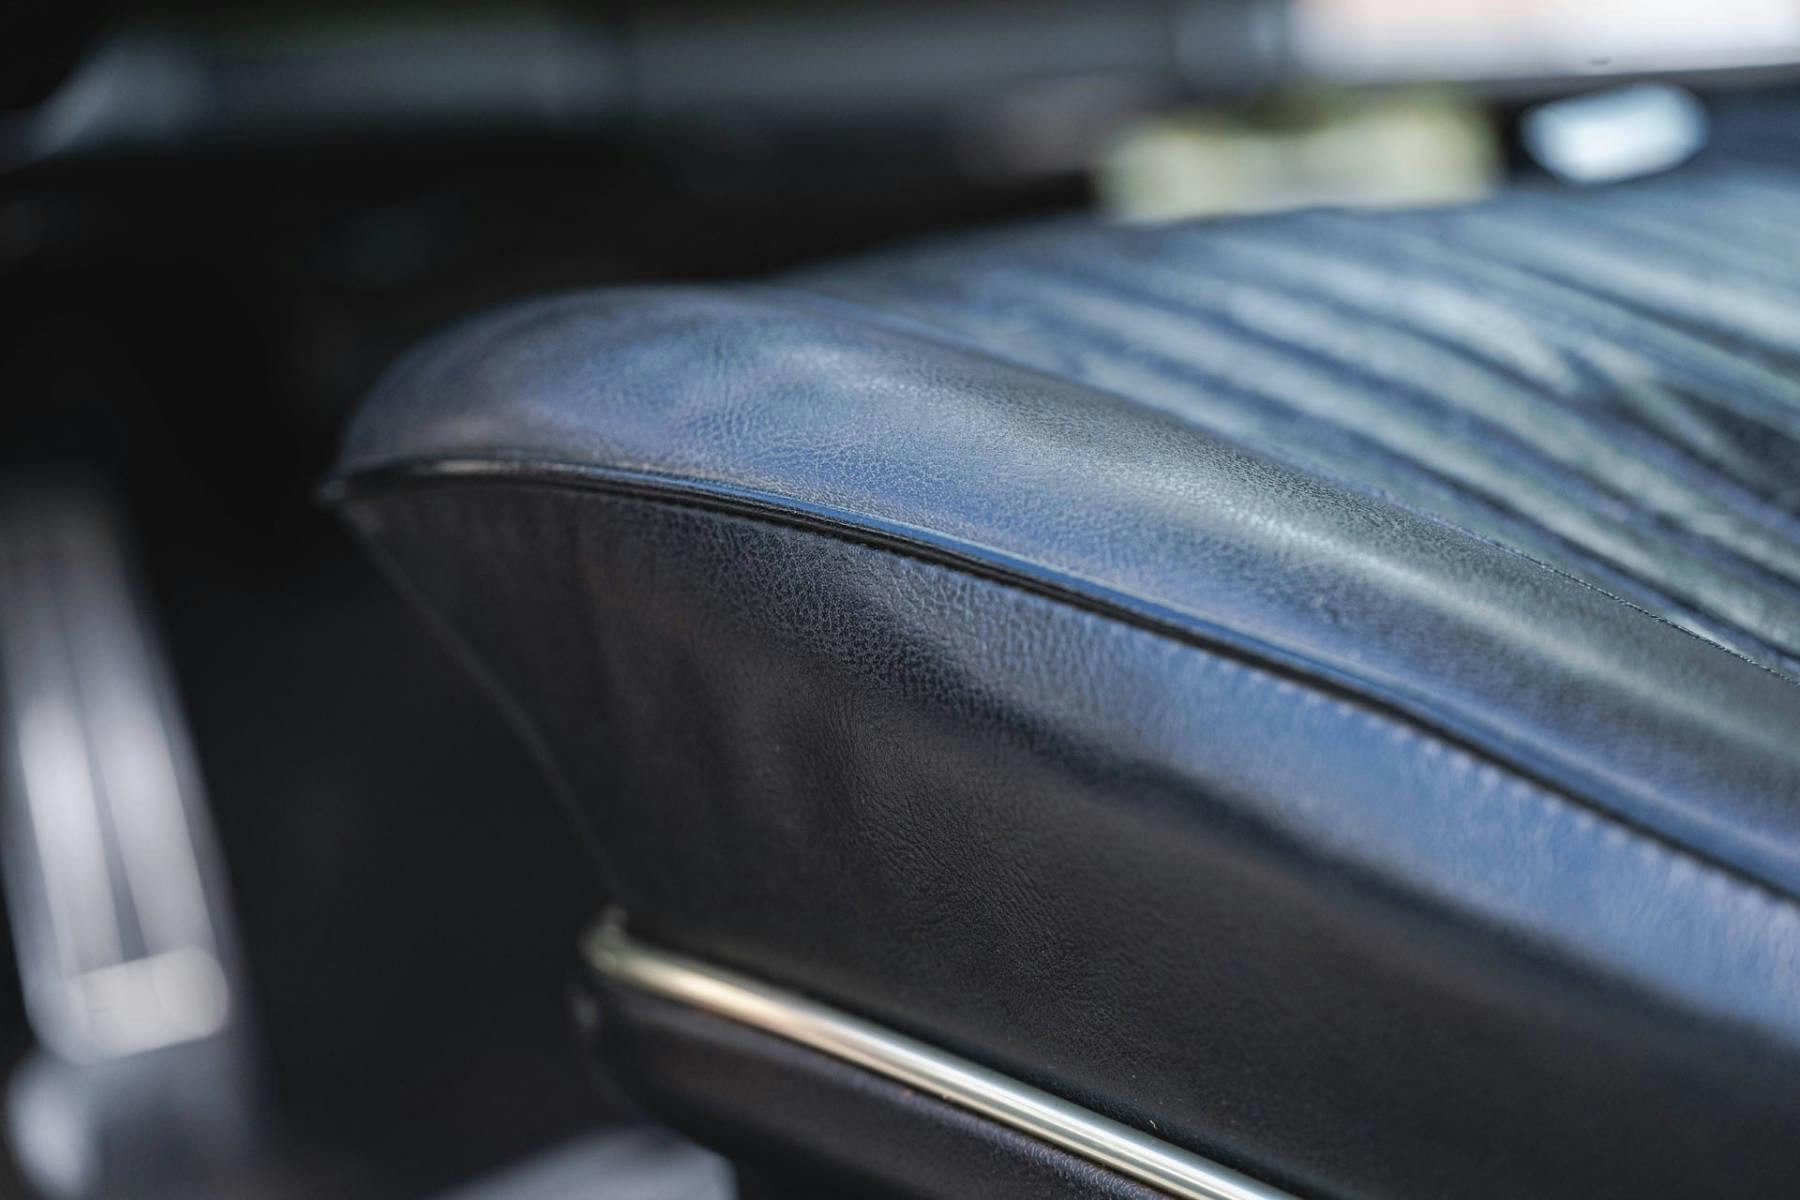 1967 Buick Riviera seat leather detail